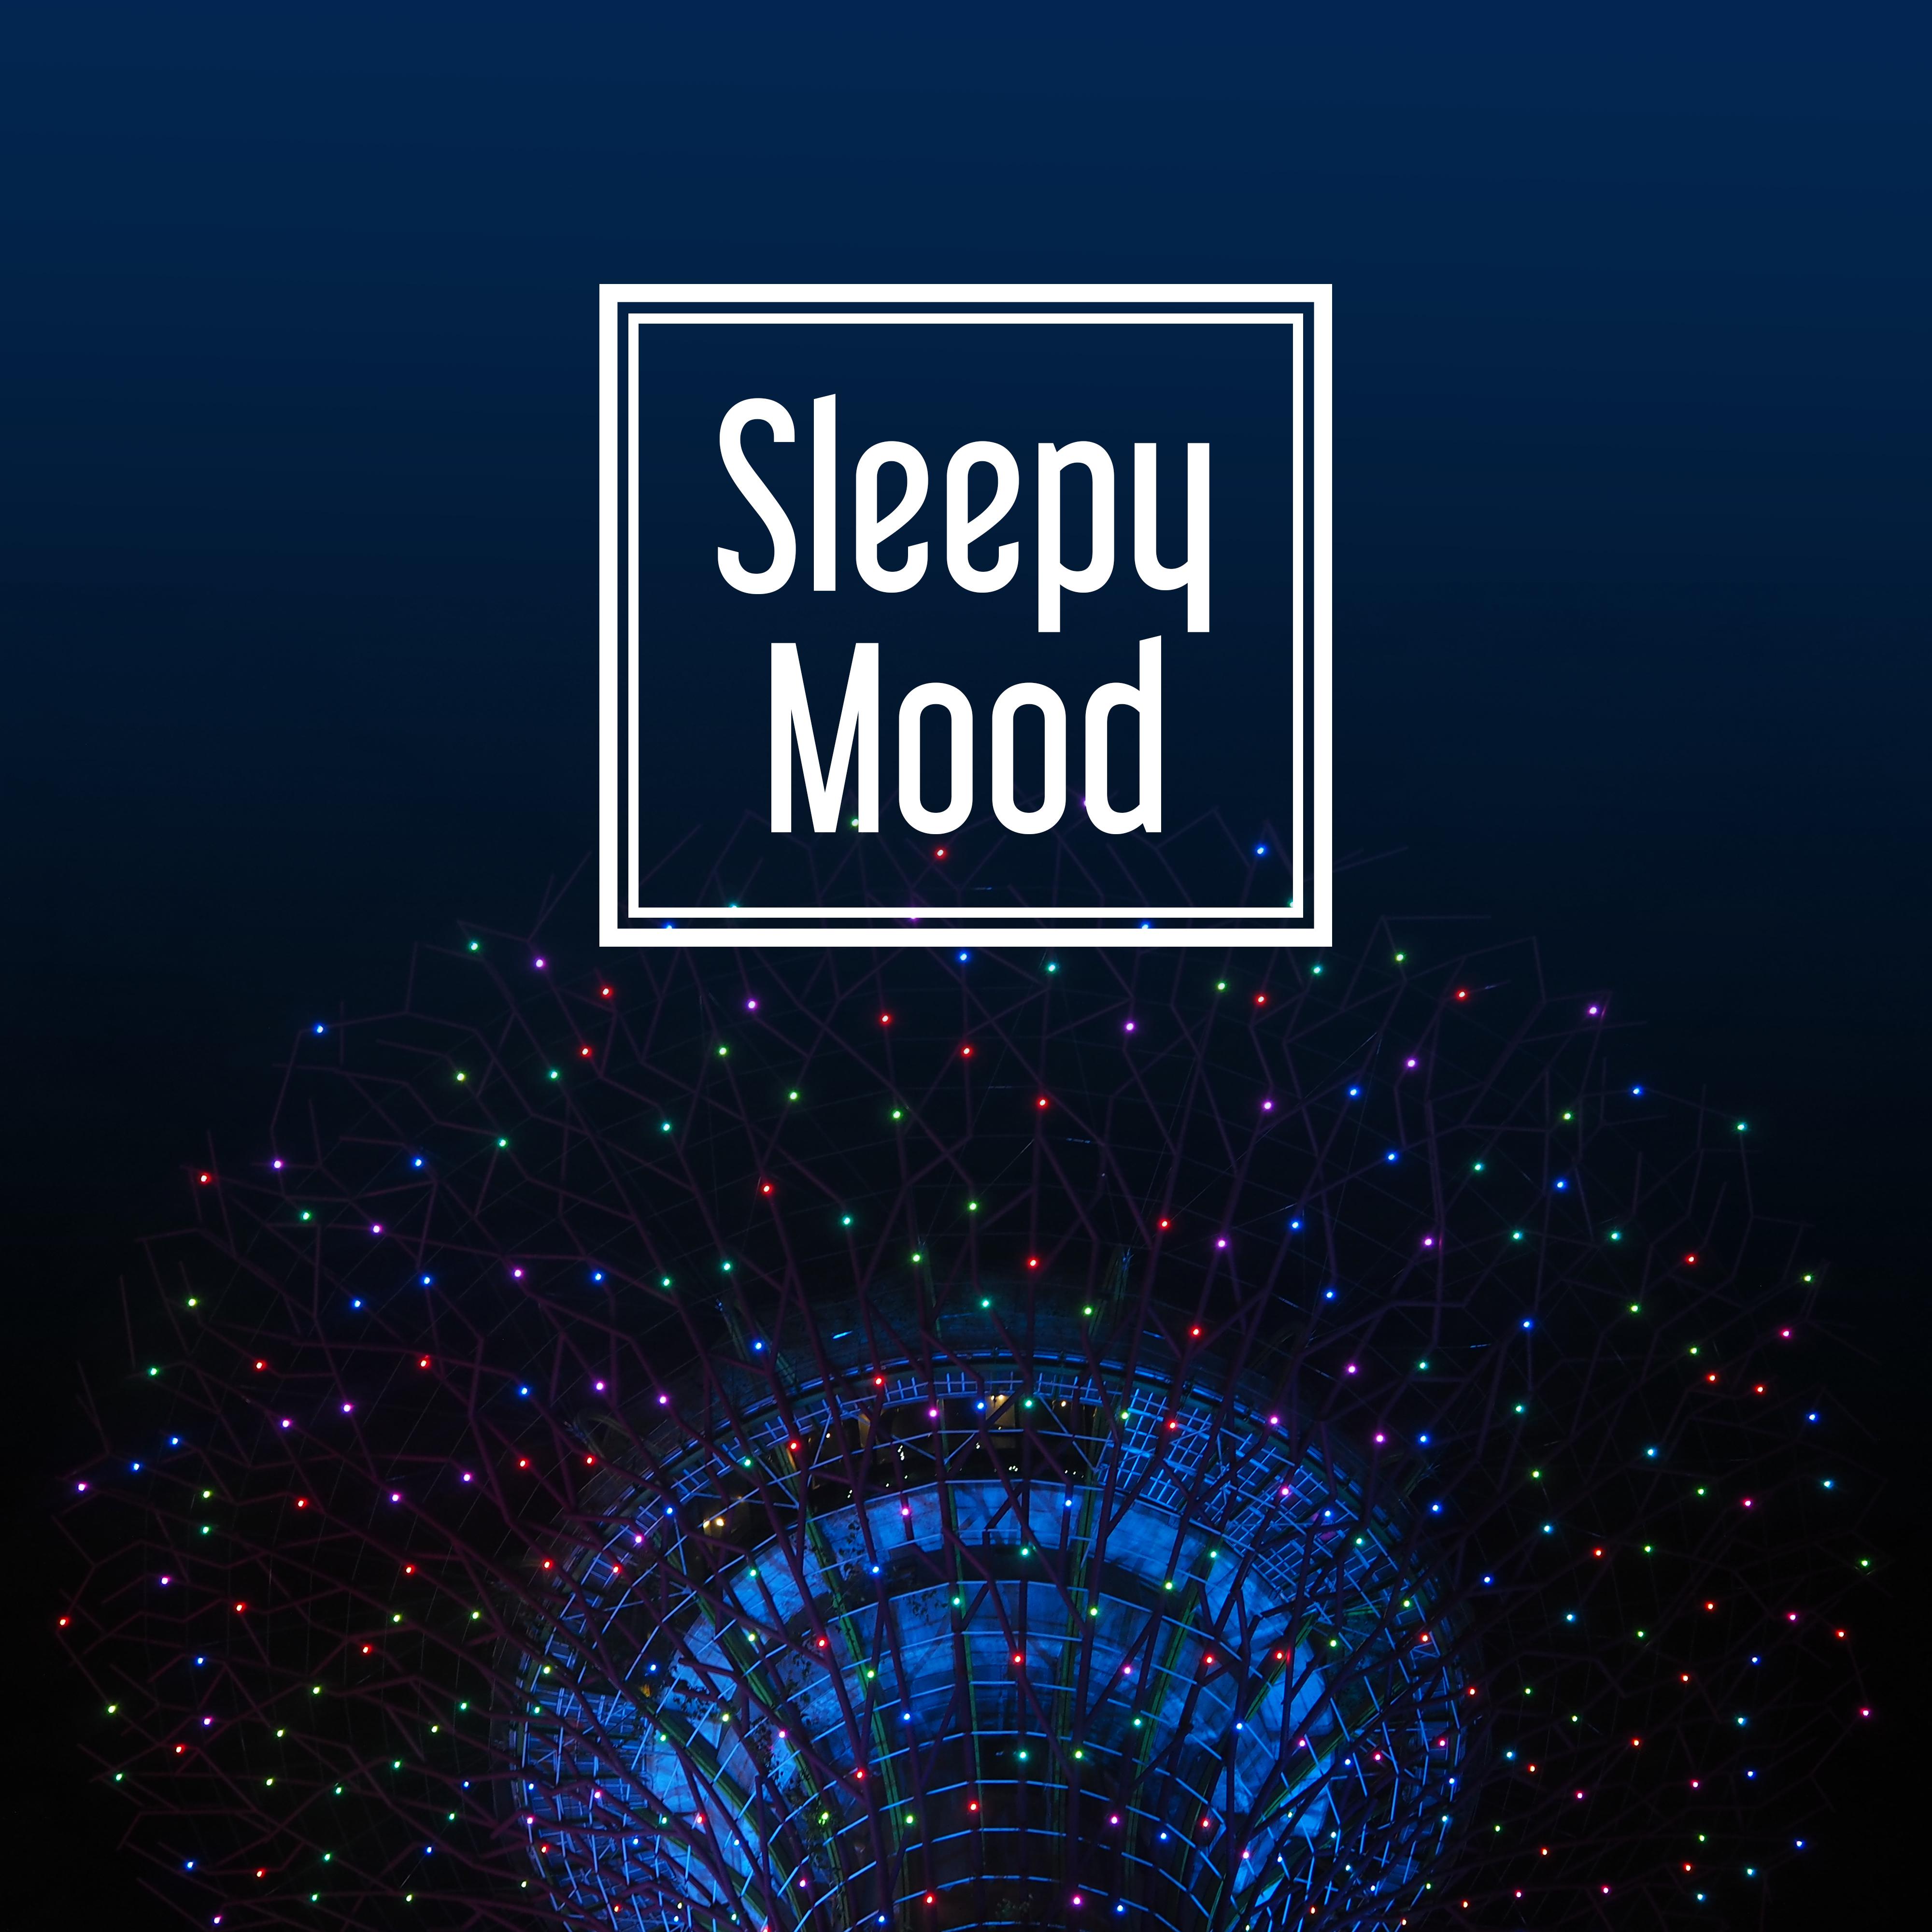 Sleepy Mood – Relaxing Music for Rest, Peaceful Sounds of Nature, Helpful for Falling Asleep, Music for Deep Sleep